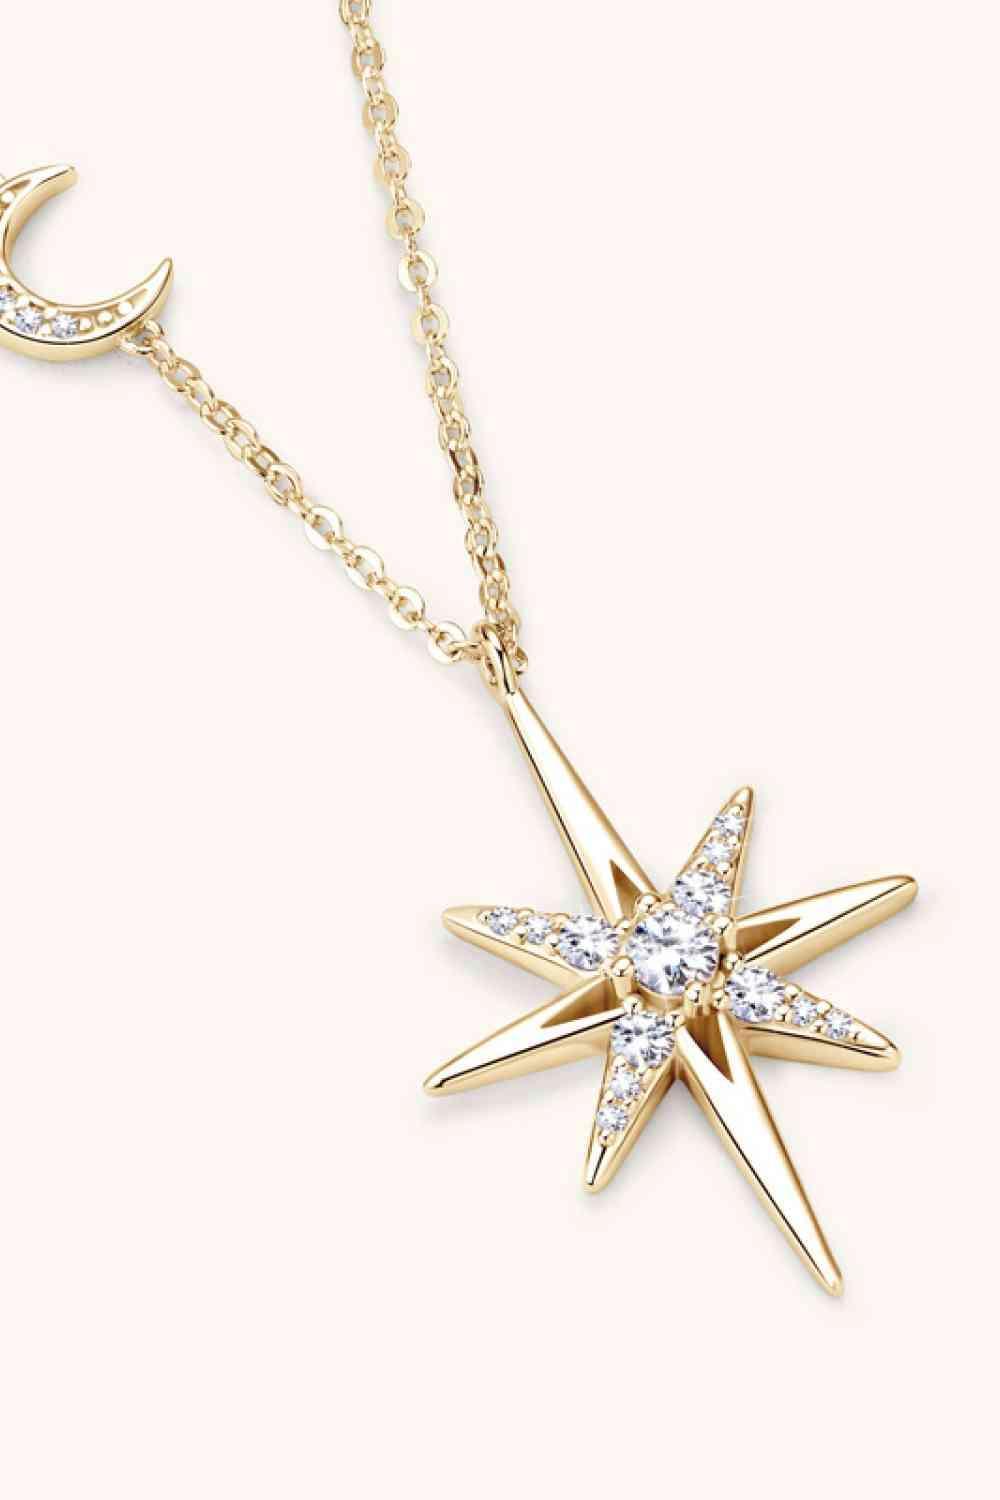 a gold necklace with a star and a crescent